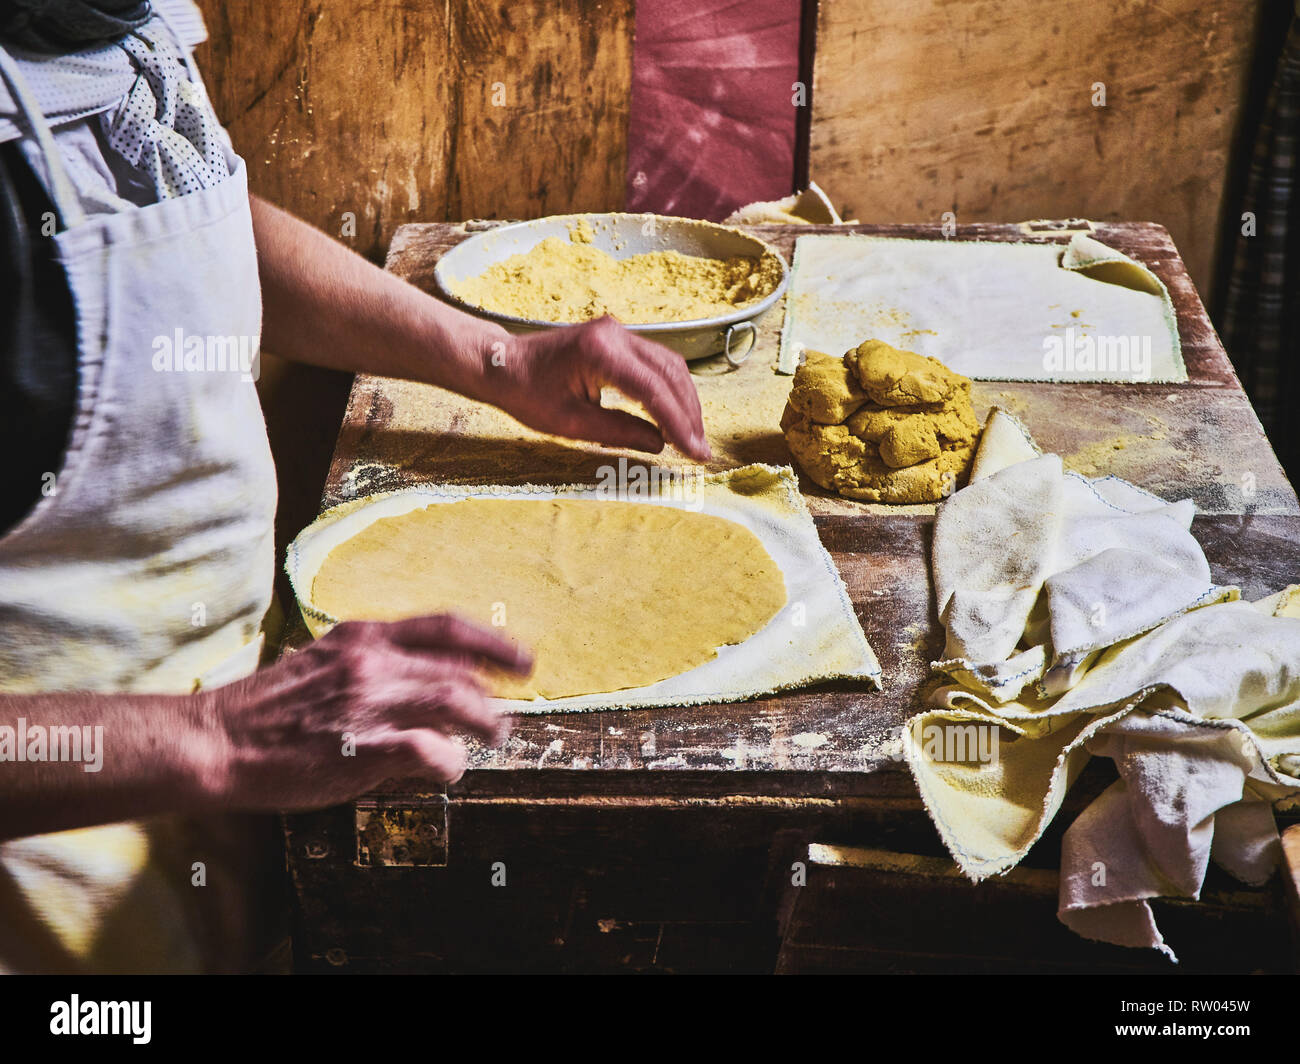 https://c8.alamy.com/comp/RW045W/a-cook-making-tortillas-on-a-wooden-rustic-table-RW045W.jpg